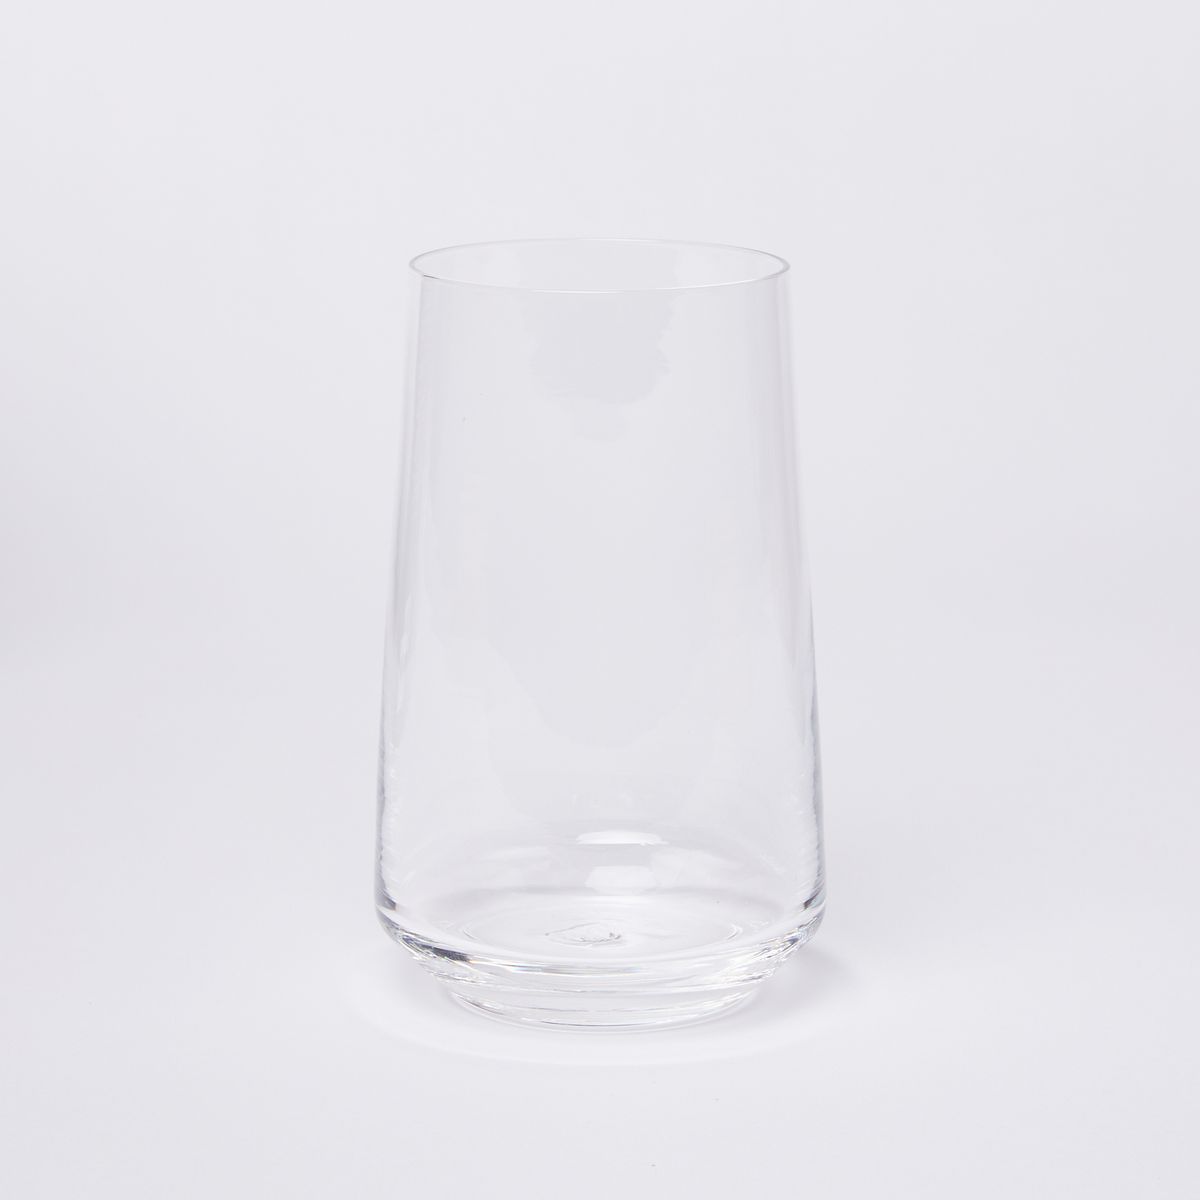 A clear round glass that tapers towards the rim